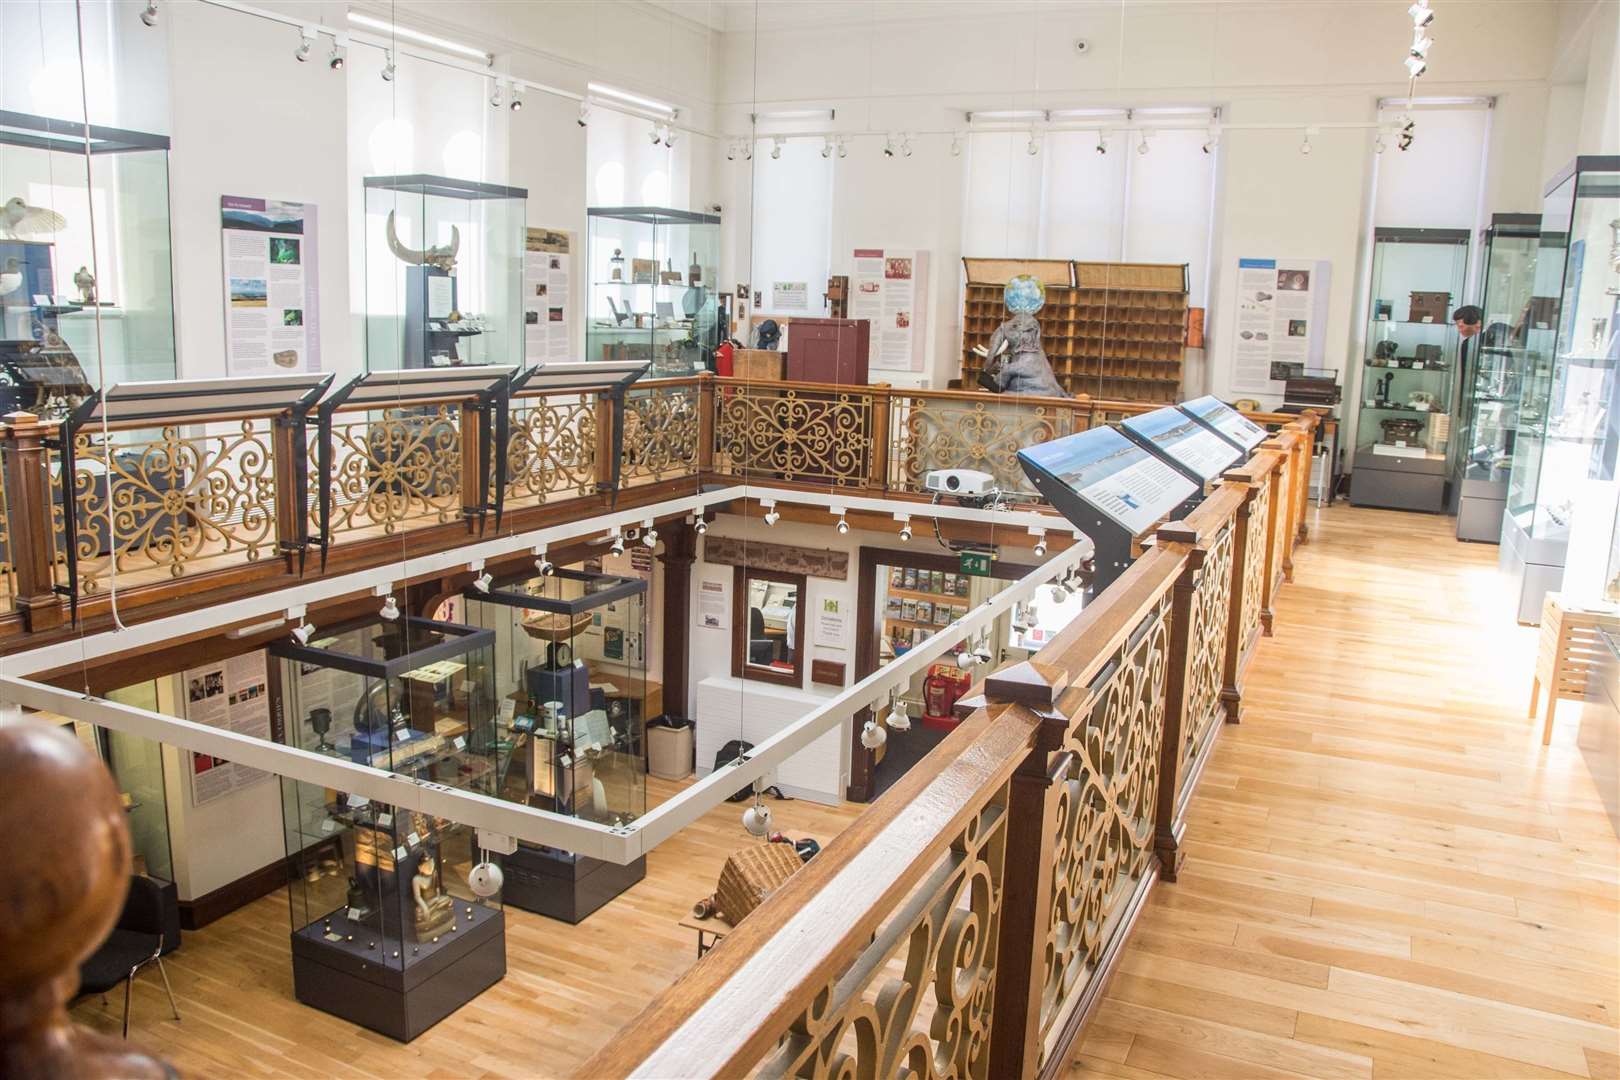 Some of the museum's 50,000 artefacts.